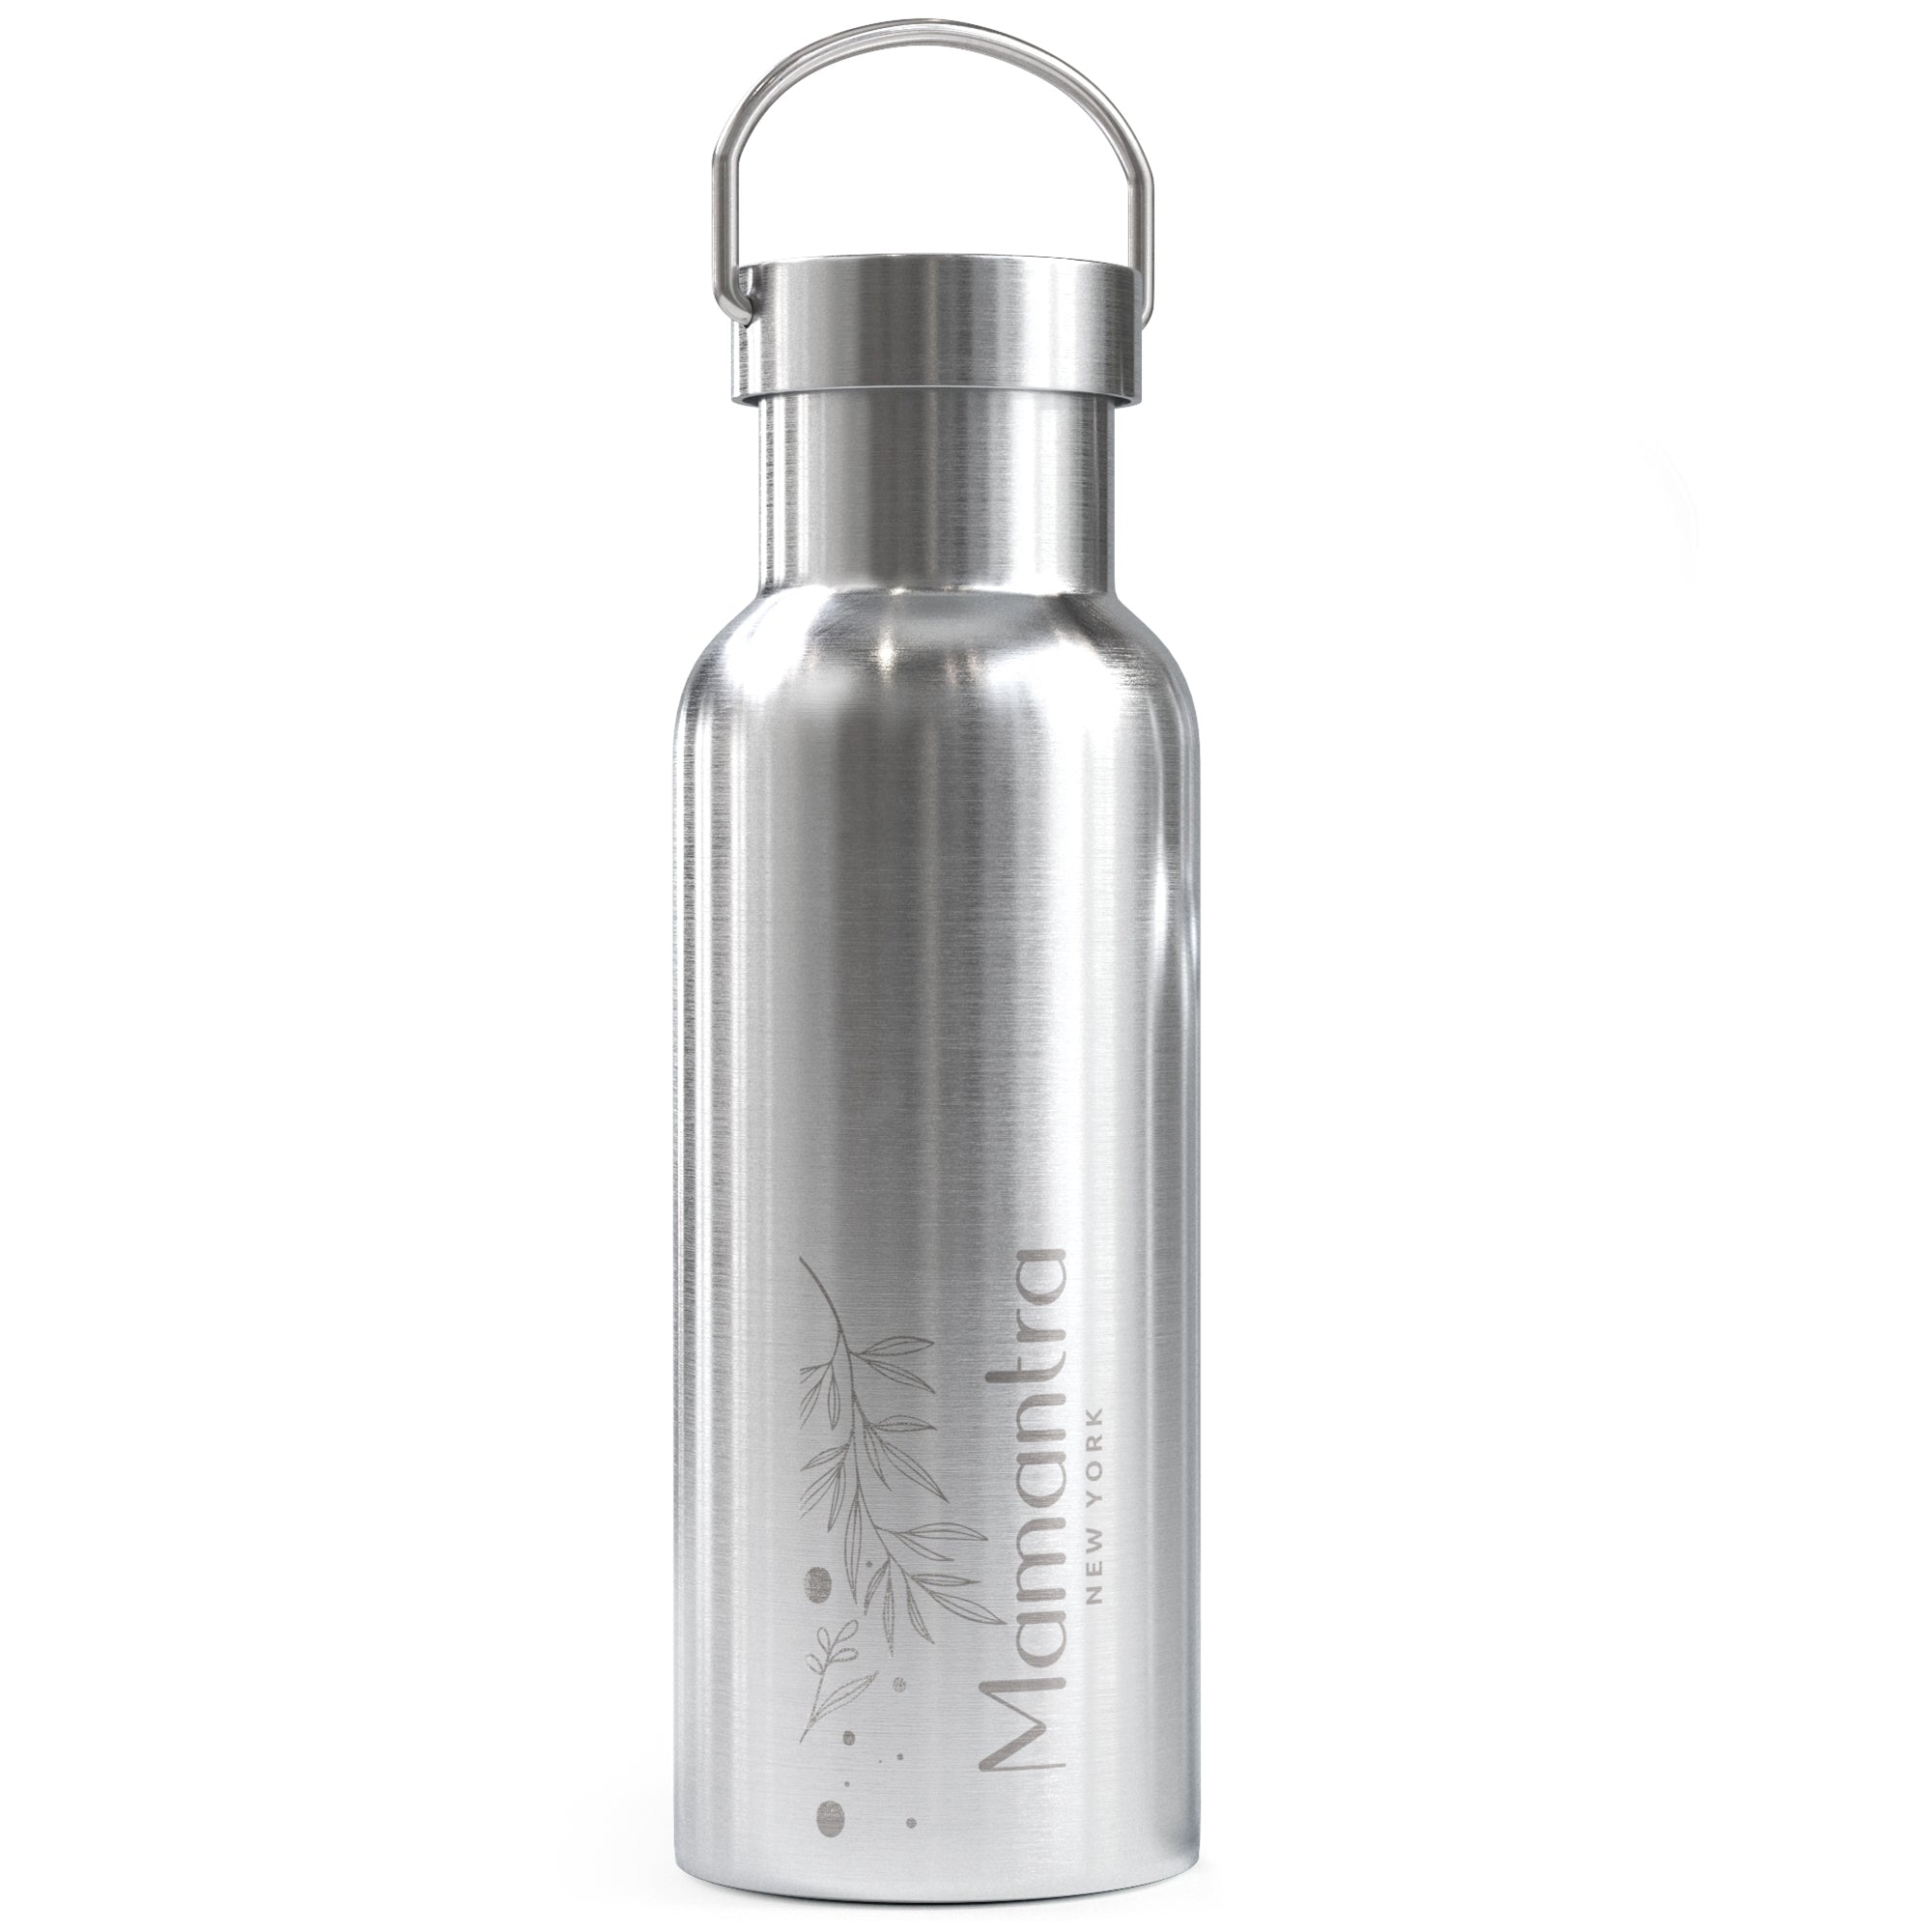 Stainless Steel Insulated Bottle 500mL (16.9oz) - FREE w/Mezza bag purchase!